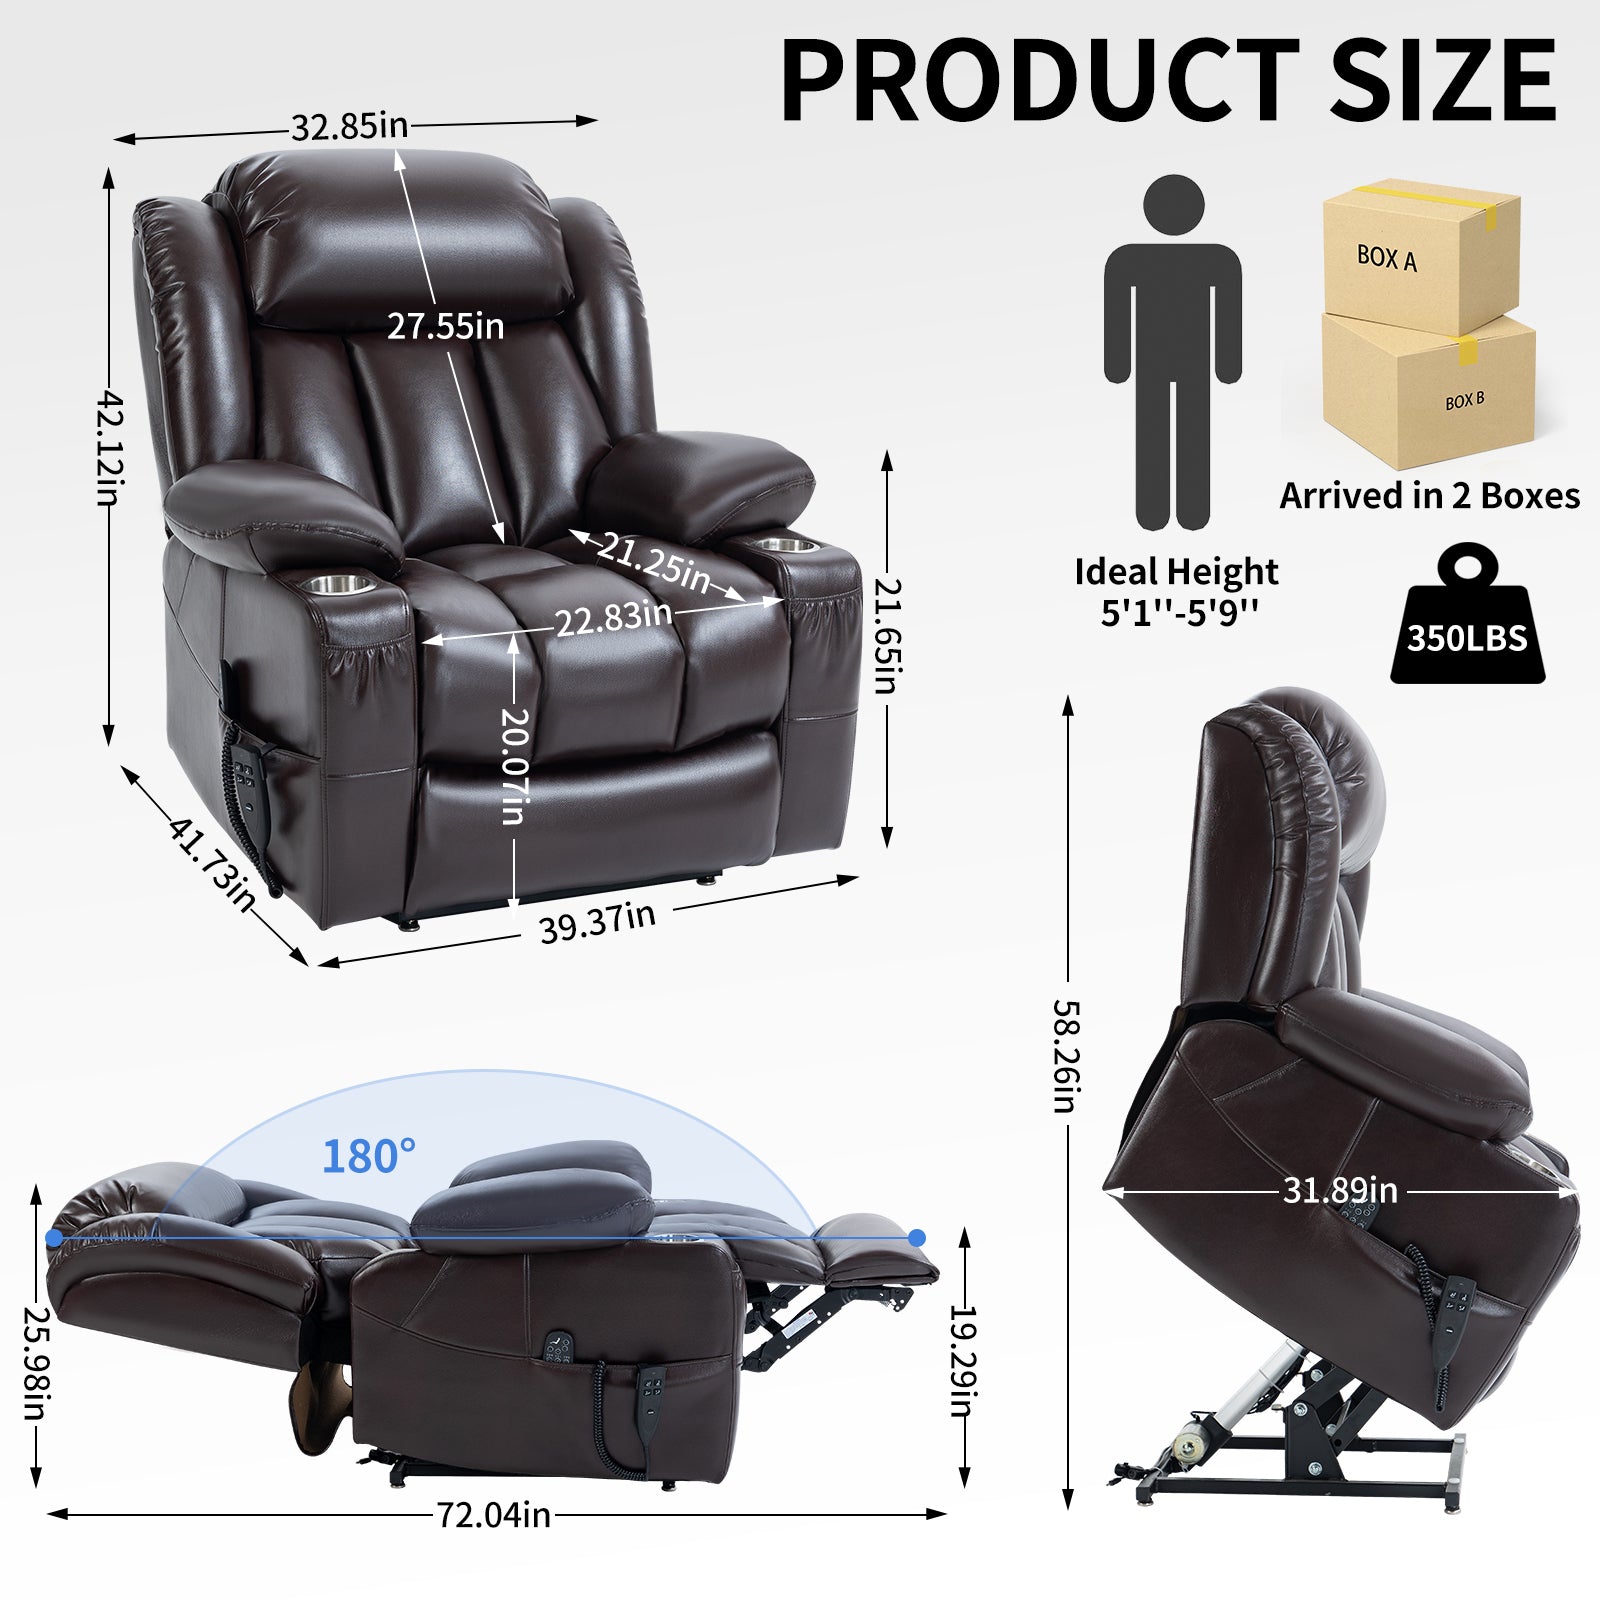 Brown Leatheraire Lifting Chair, product measurements